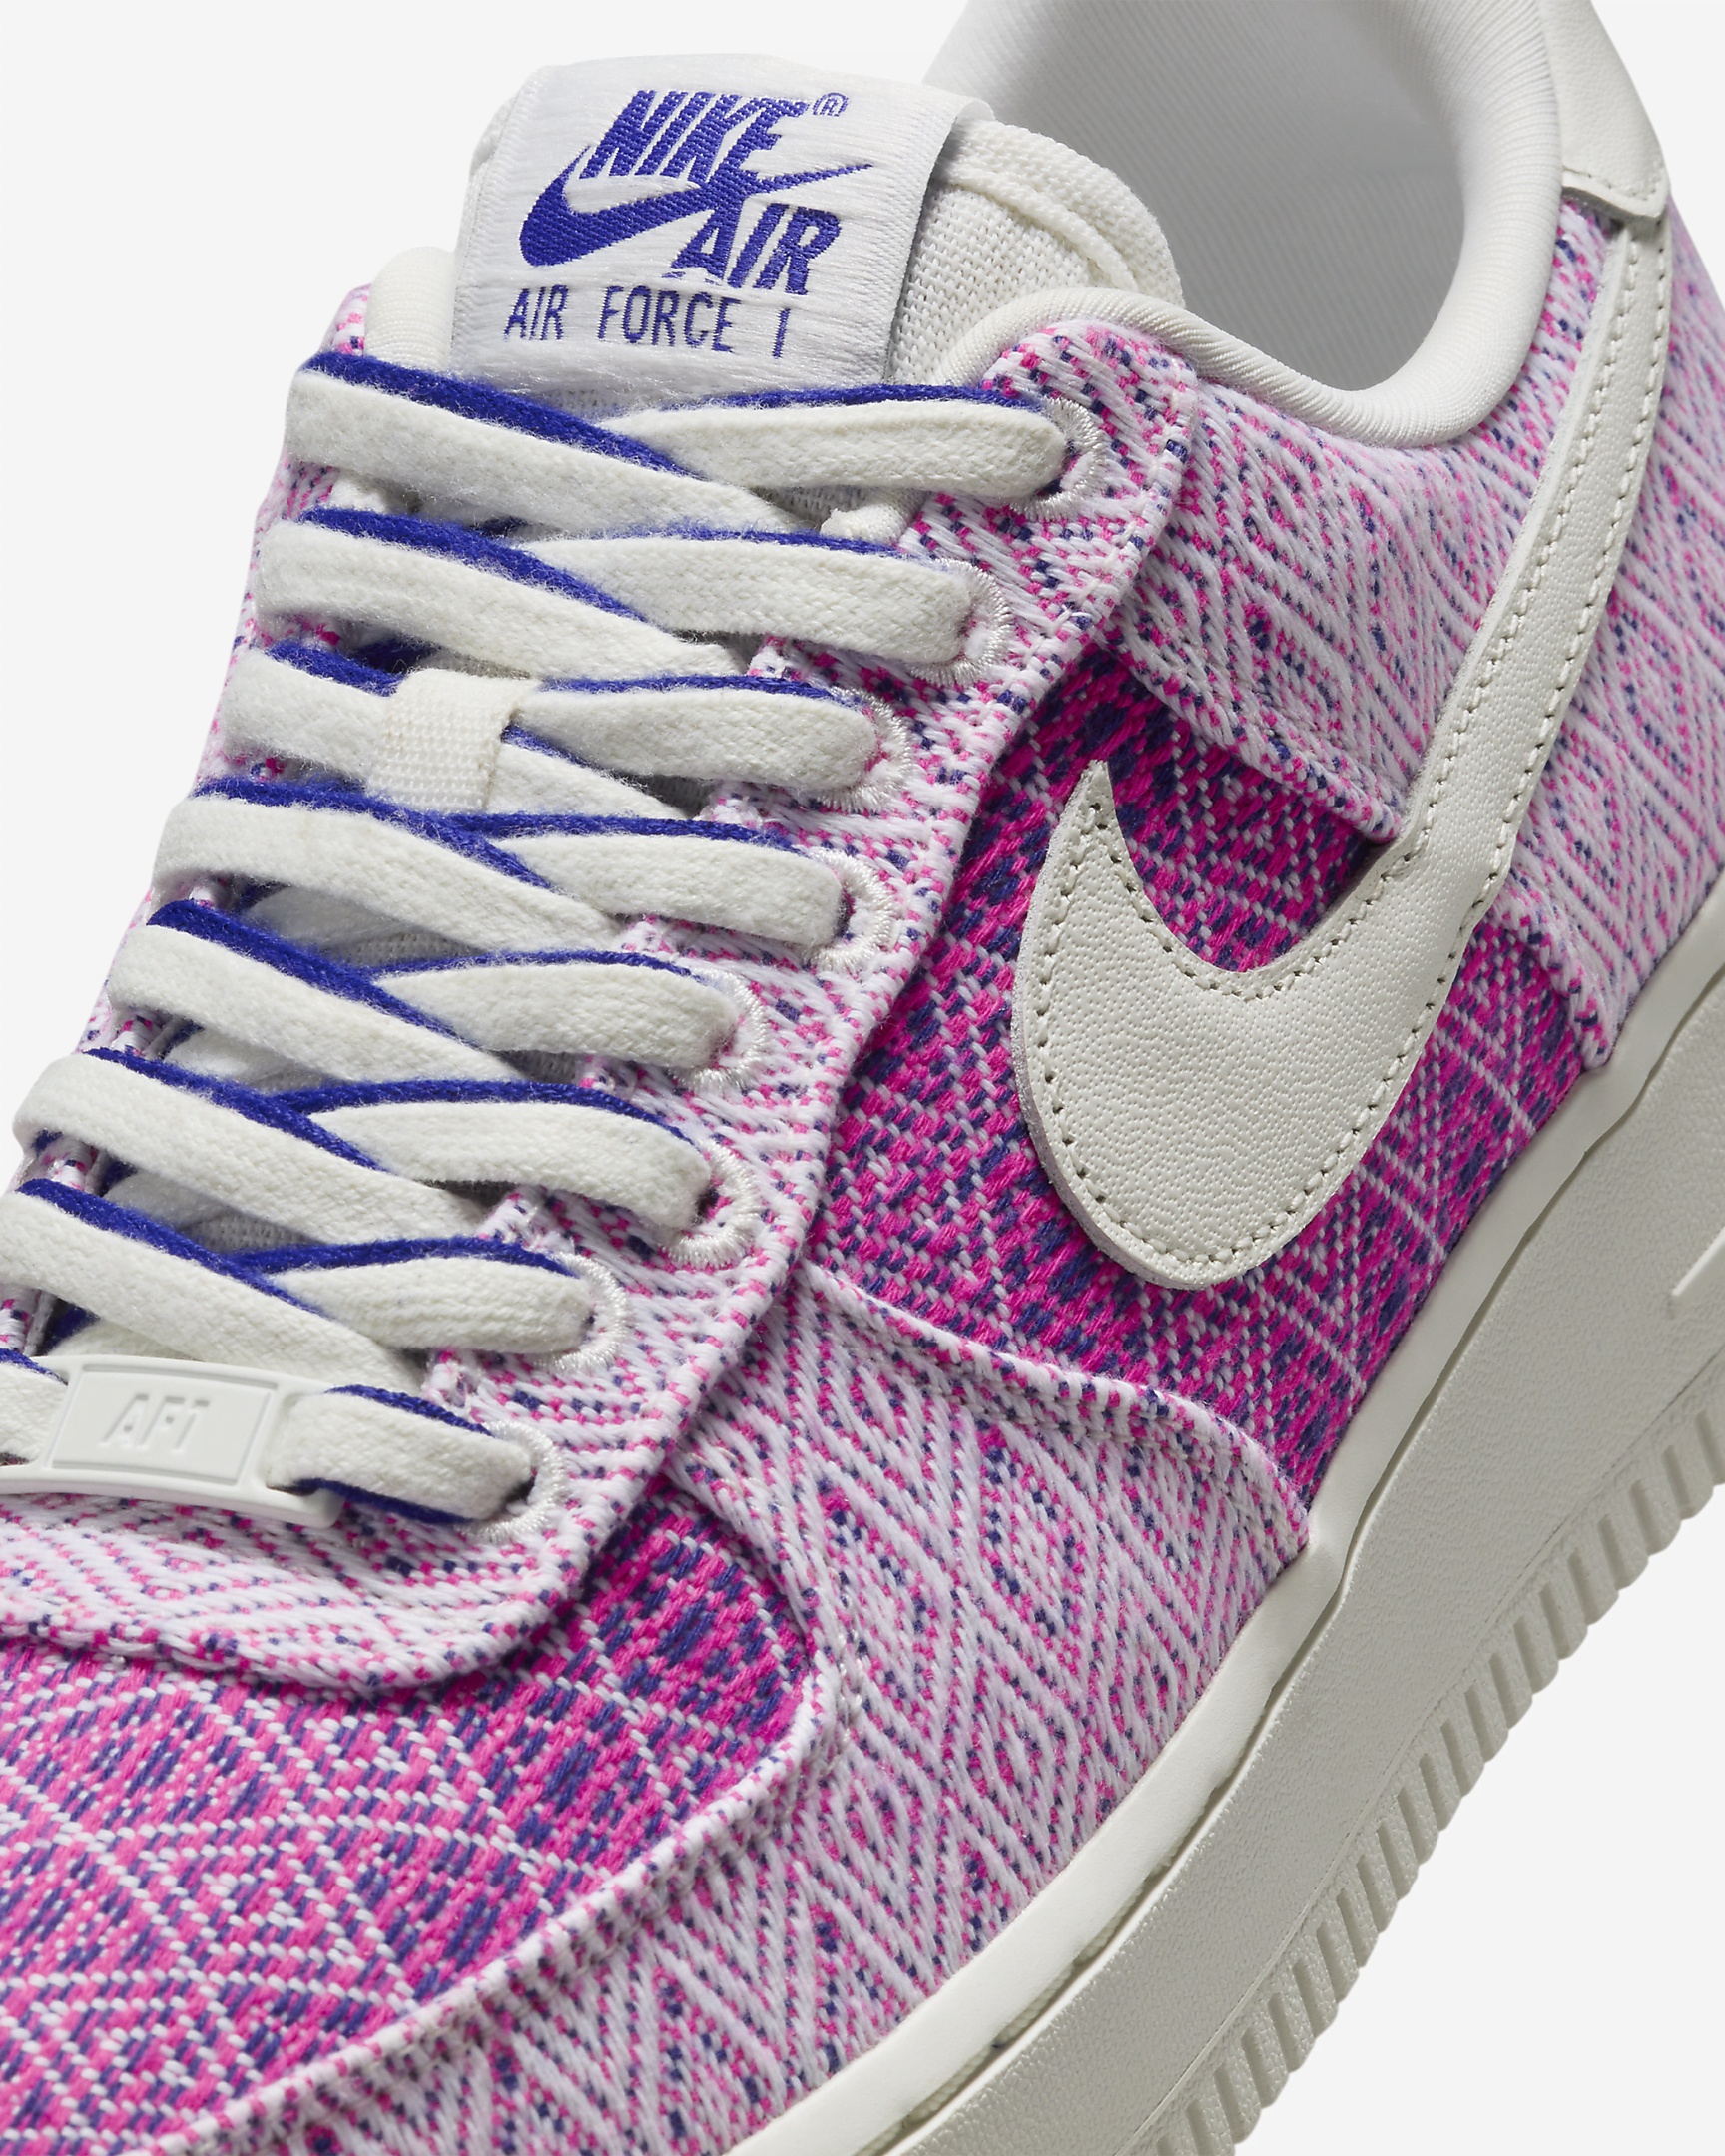 Nike Women's Air Force 1 '07 Shoes - 7